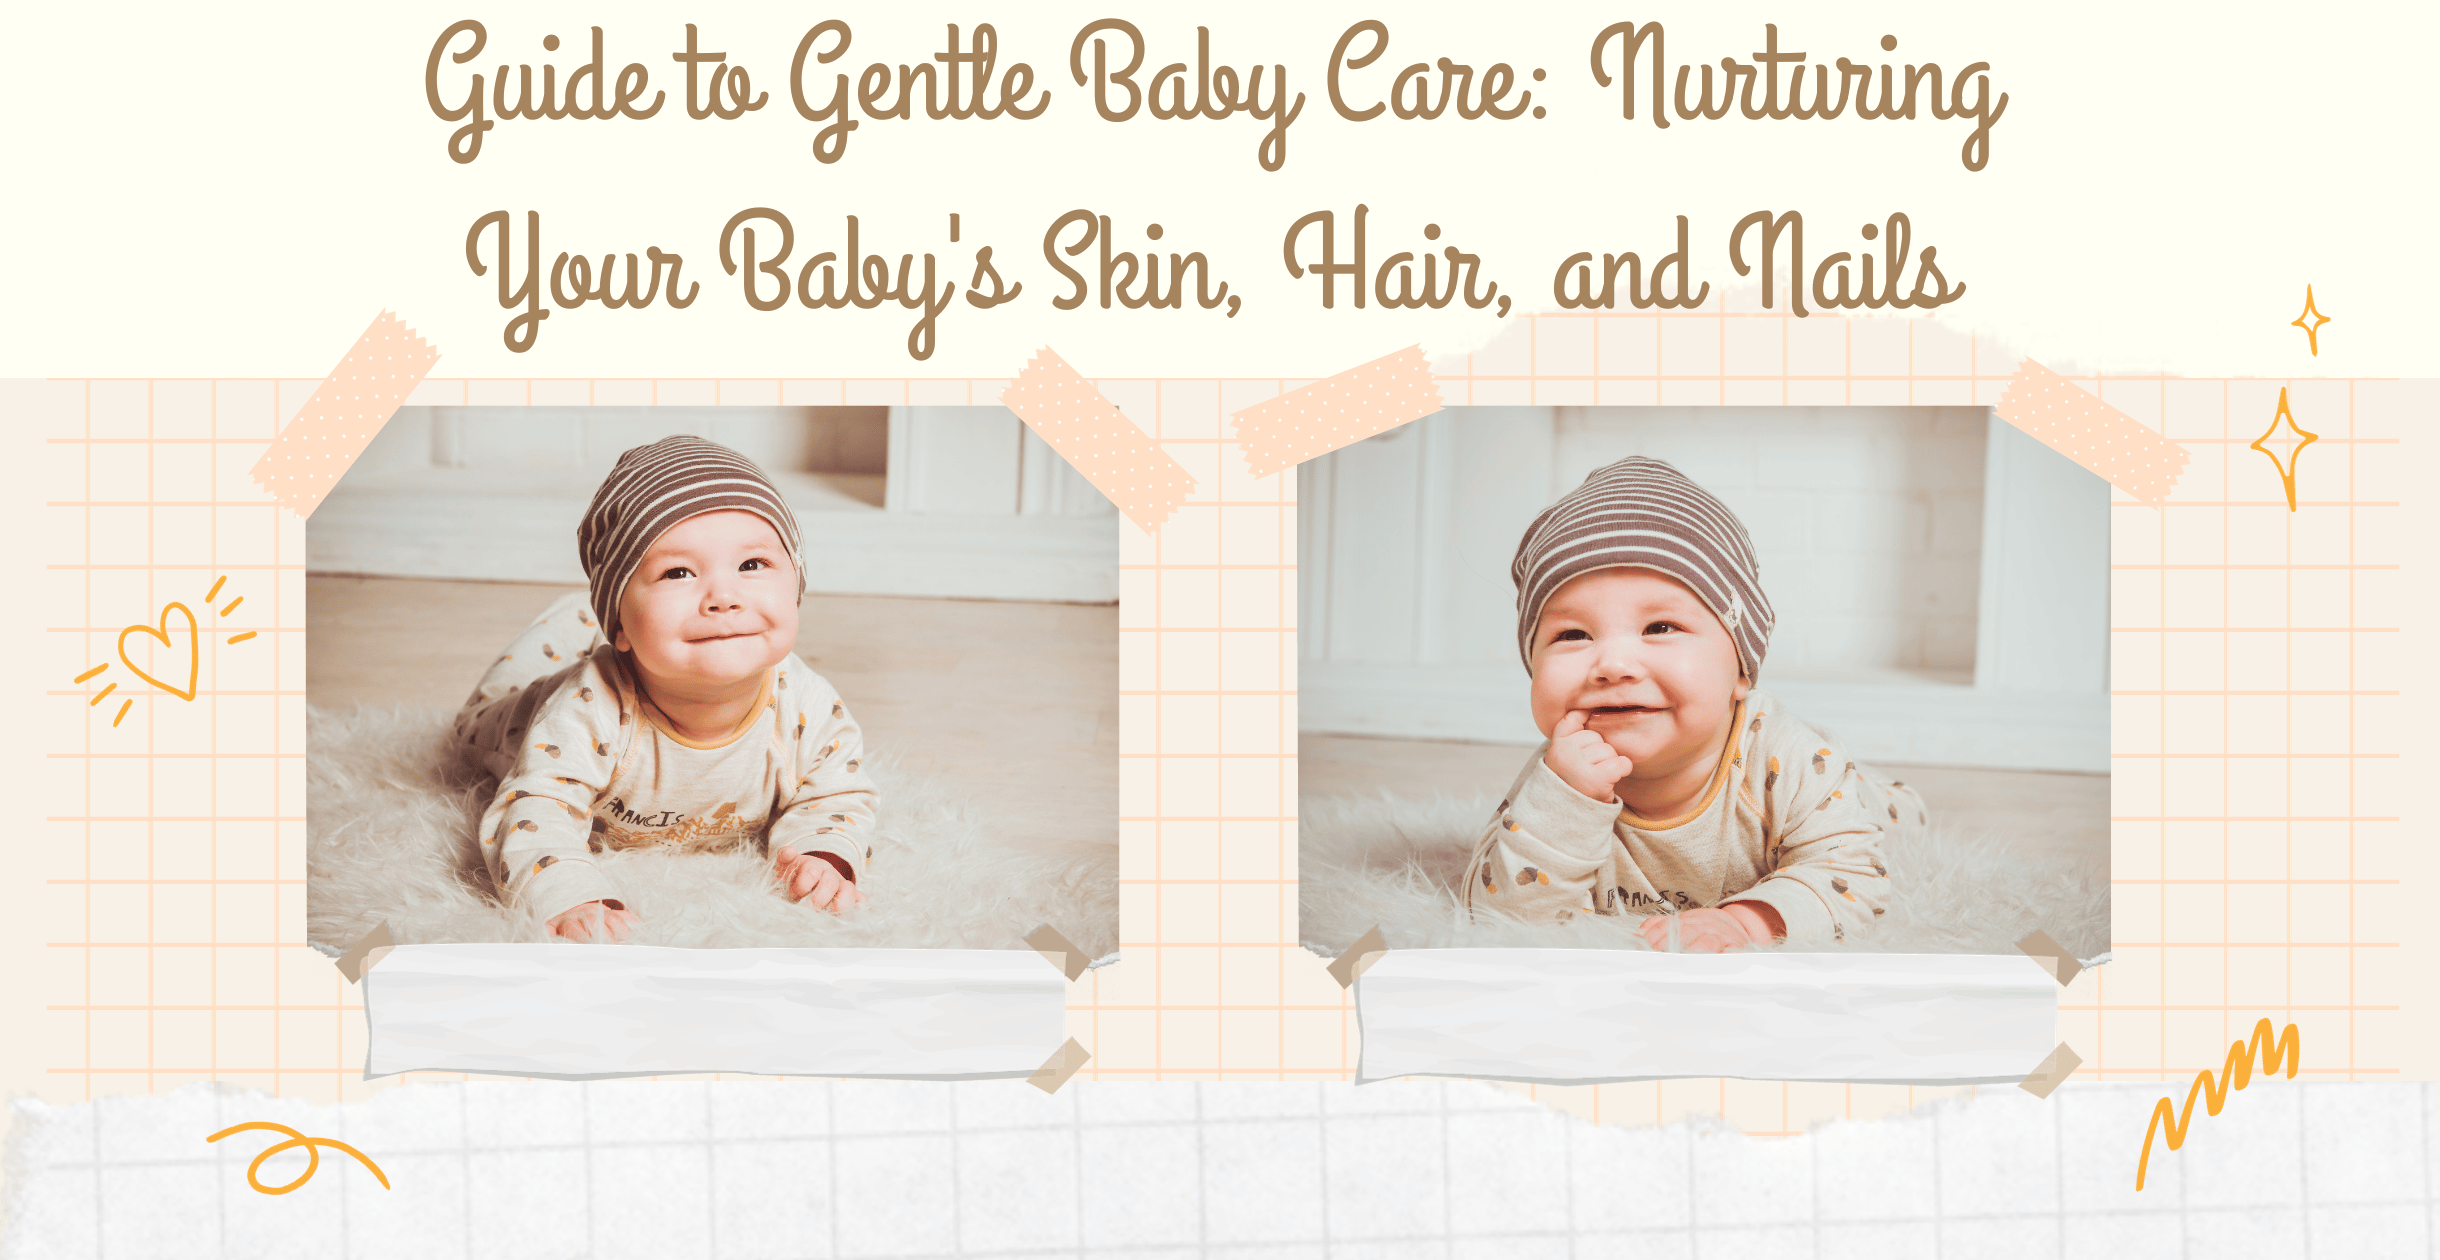 Guide to Gentle Baby Care: Nurturing Your Baby's Skin, Hair, and Nails